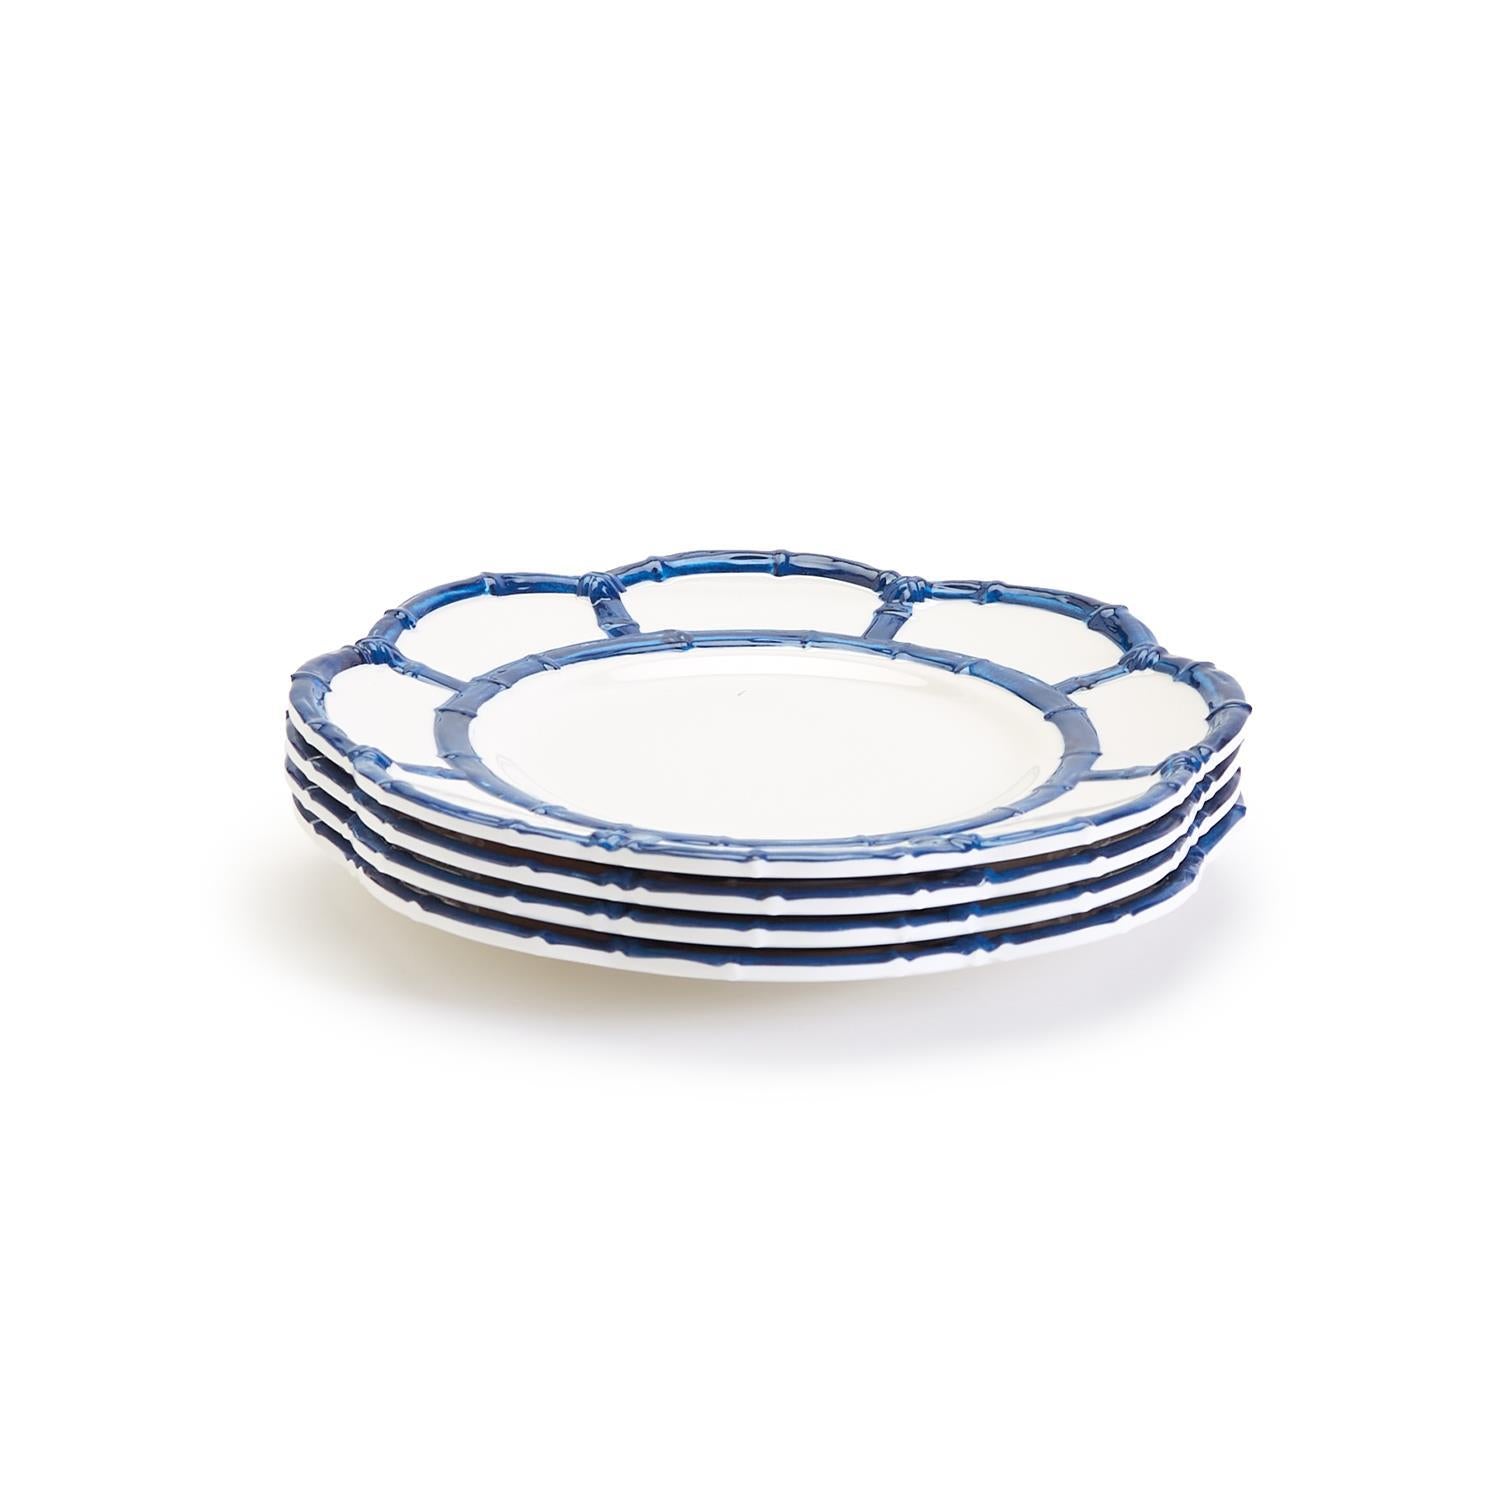 Blue Bamboo Salad/Dessert Plates with Bamboo Rim, Set of 4 - fairley fancy